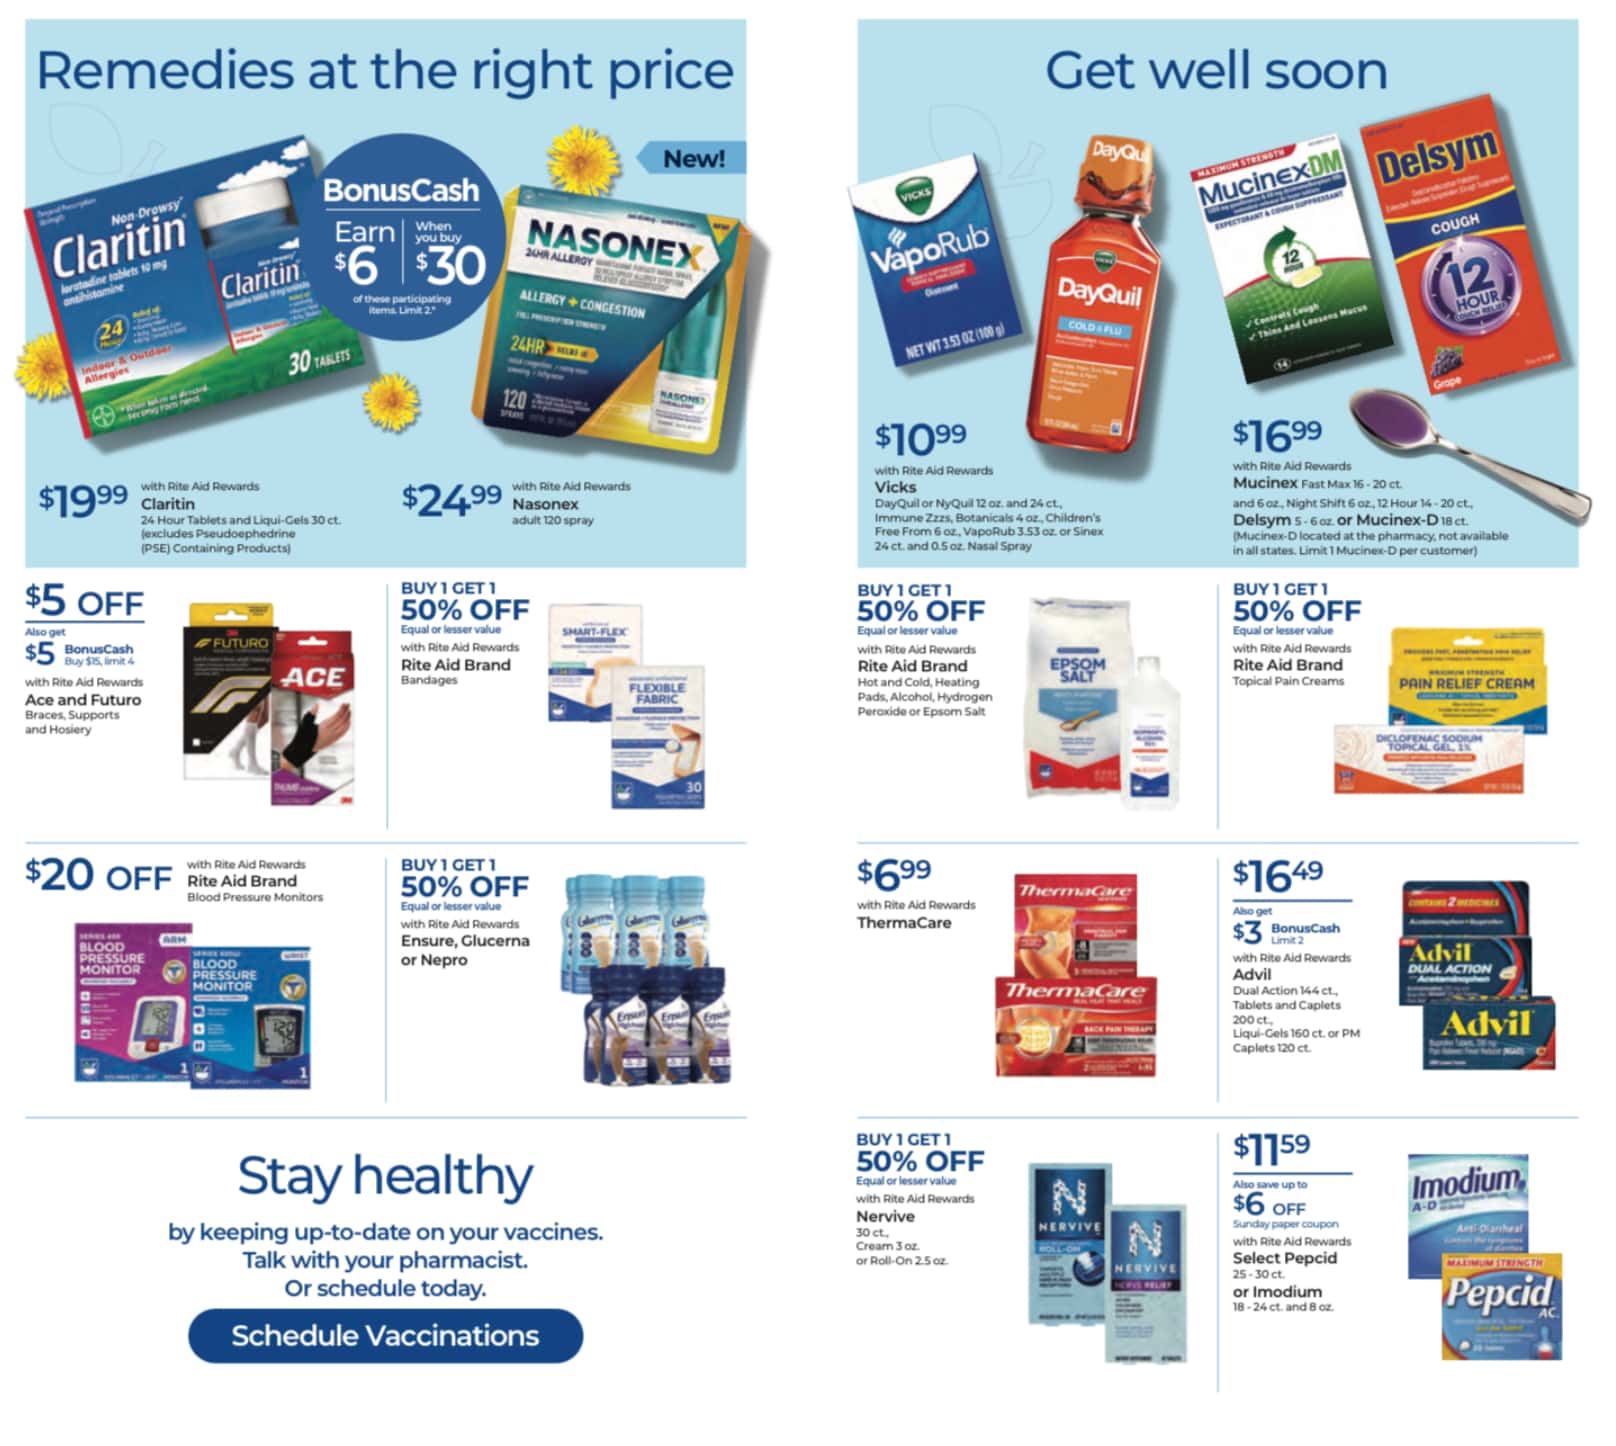 Rite Aid Weekly Ad Preview for March 26 - April 1, 2023